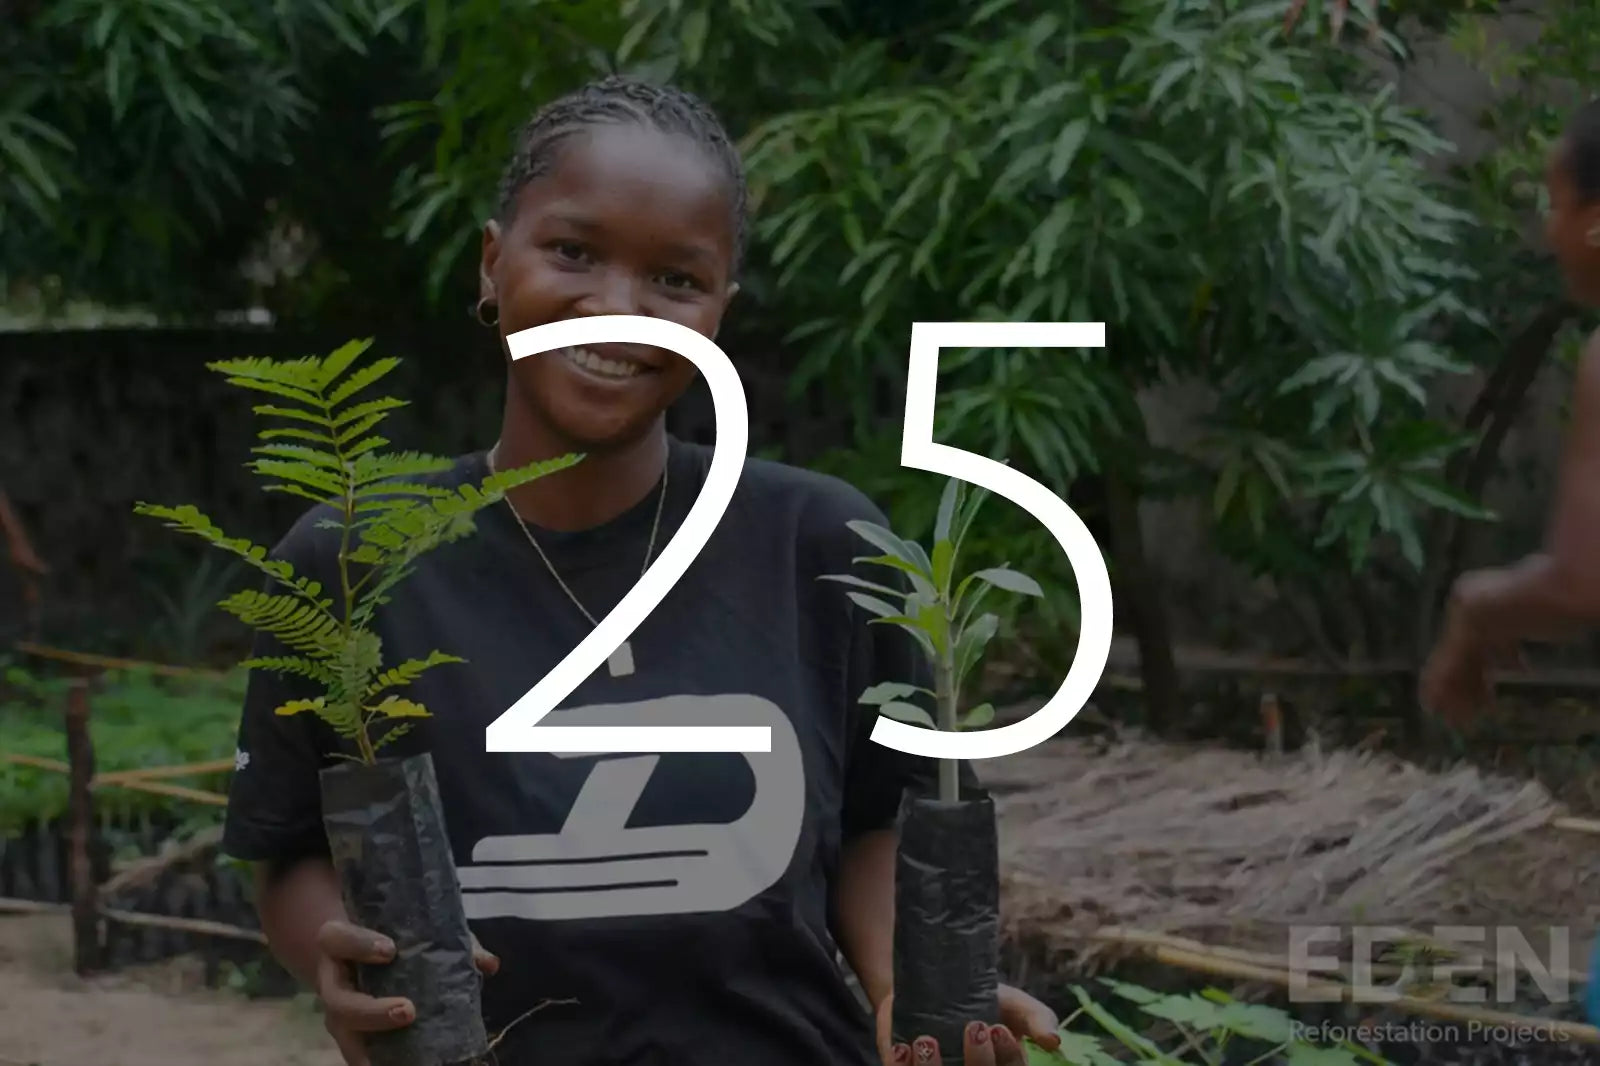 Plant 25 Trees With Eden Reforestation Projects